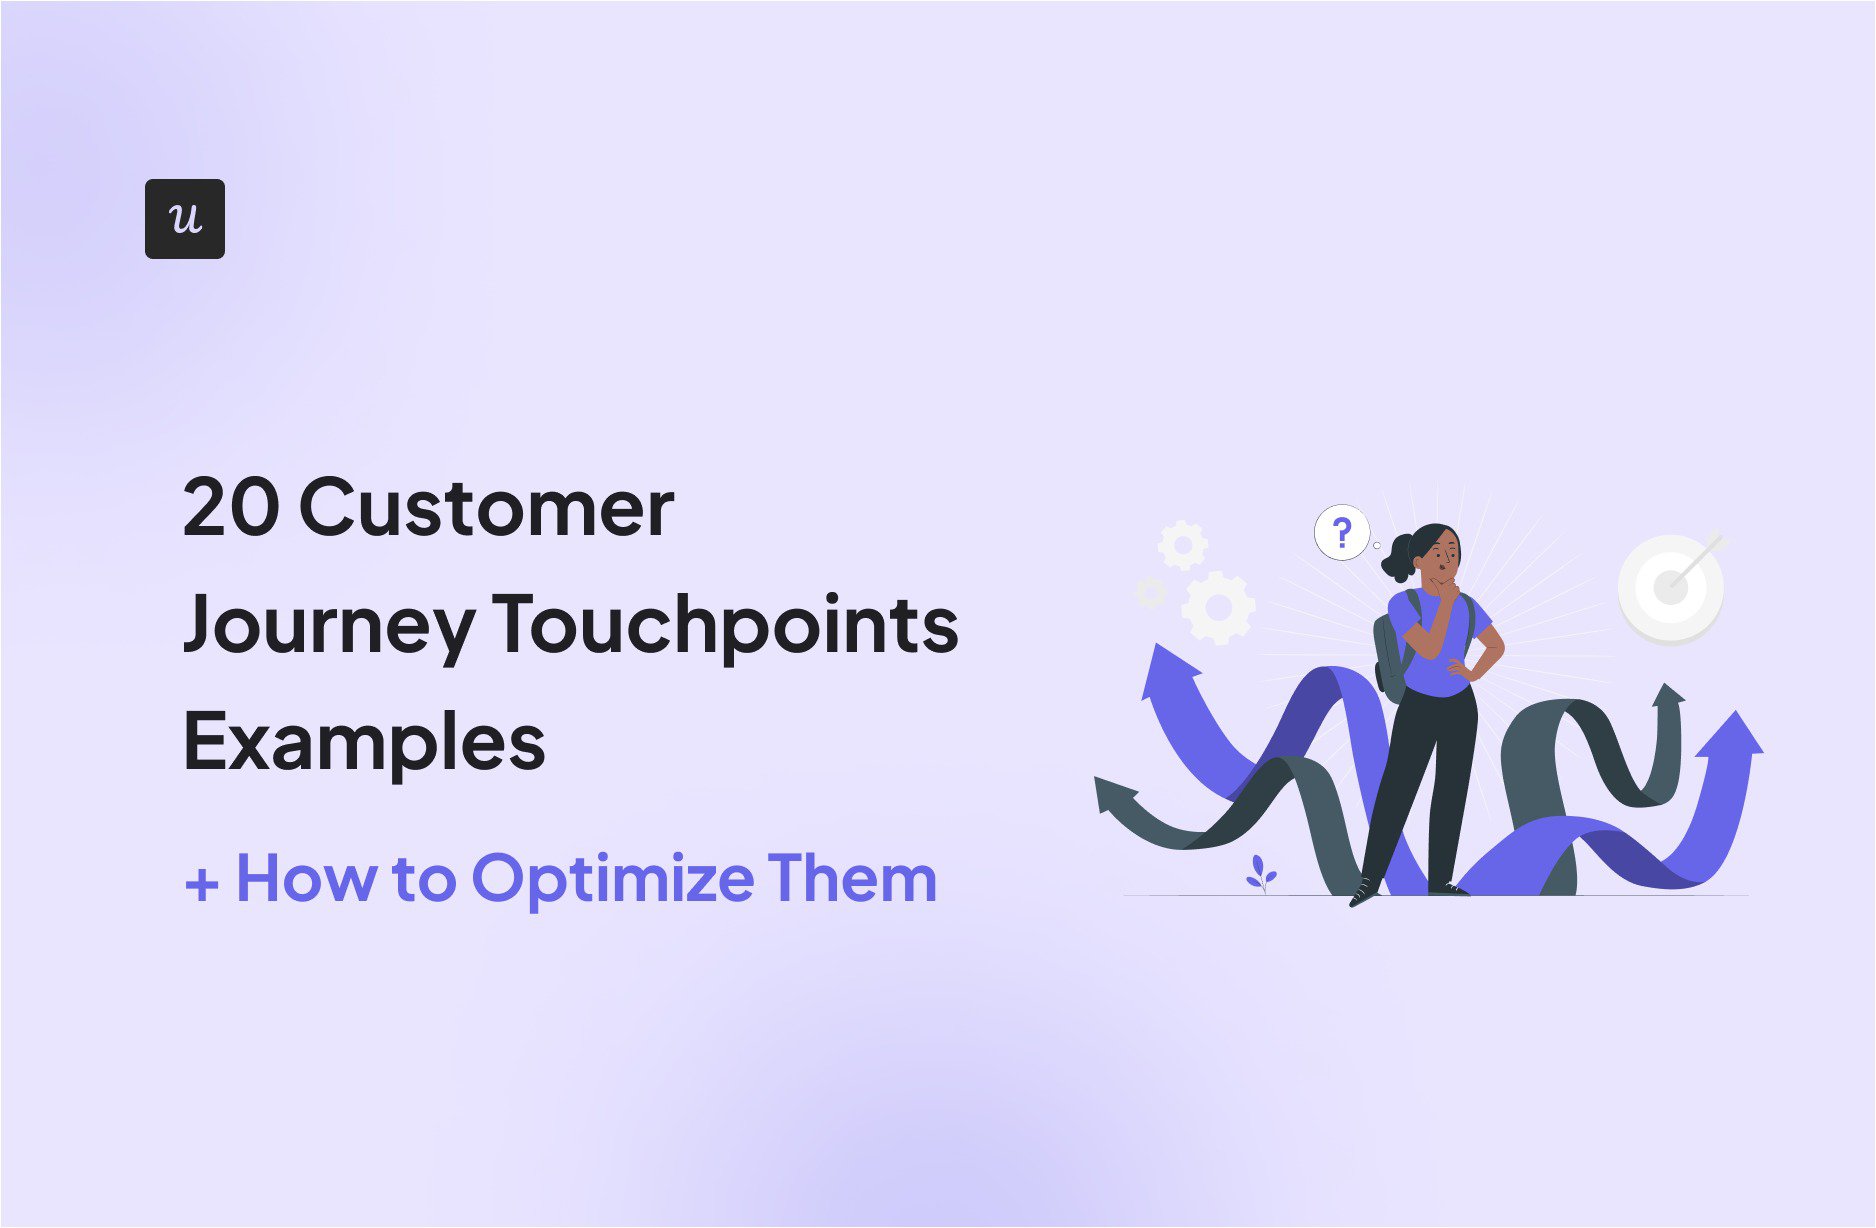 20 Customer Journey Touchpoints Examples + How to Optimize Them cover